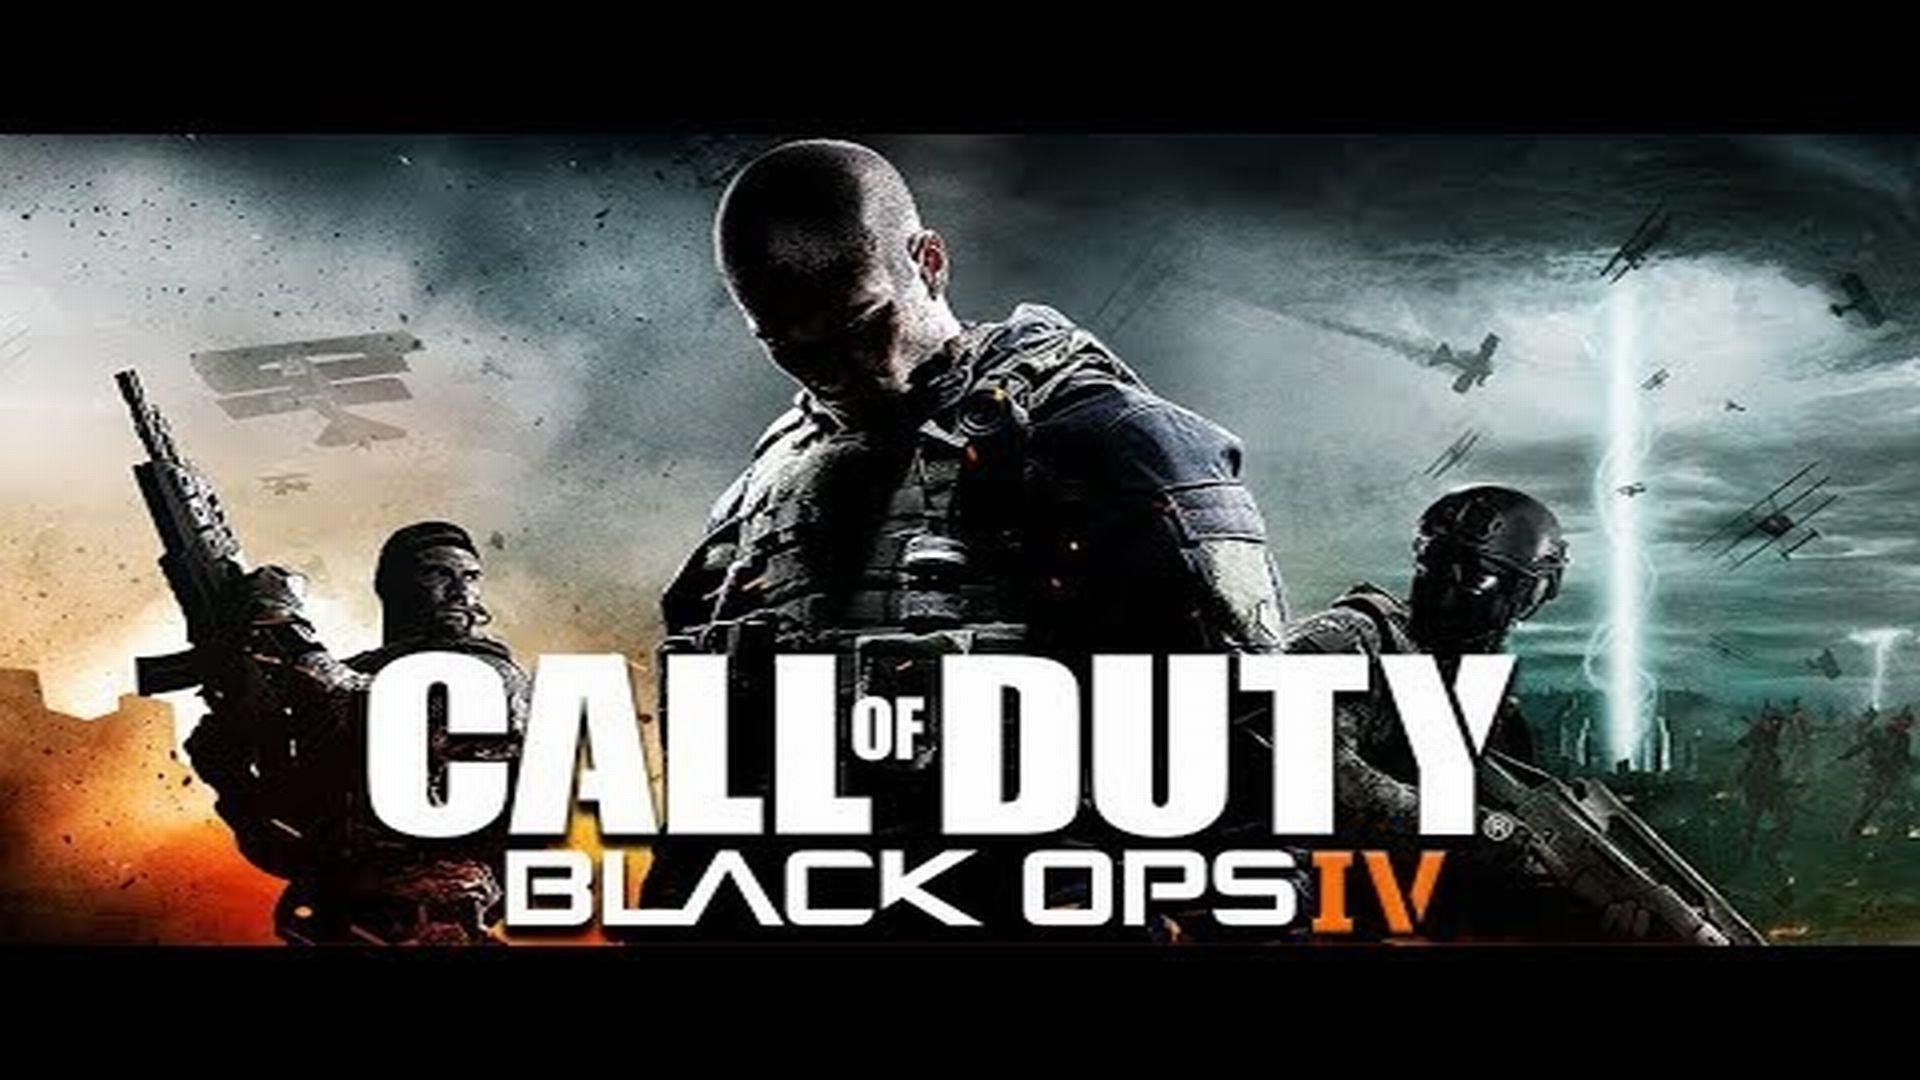 Call of Duty (COD) Black Ops 4 CD Key PC Game For Free Download